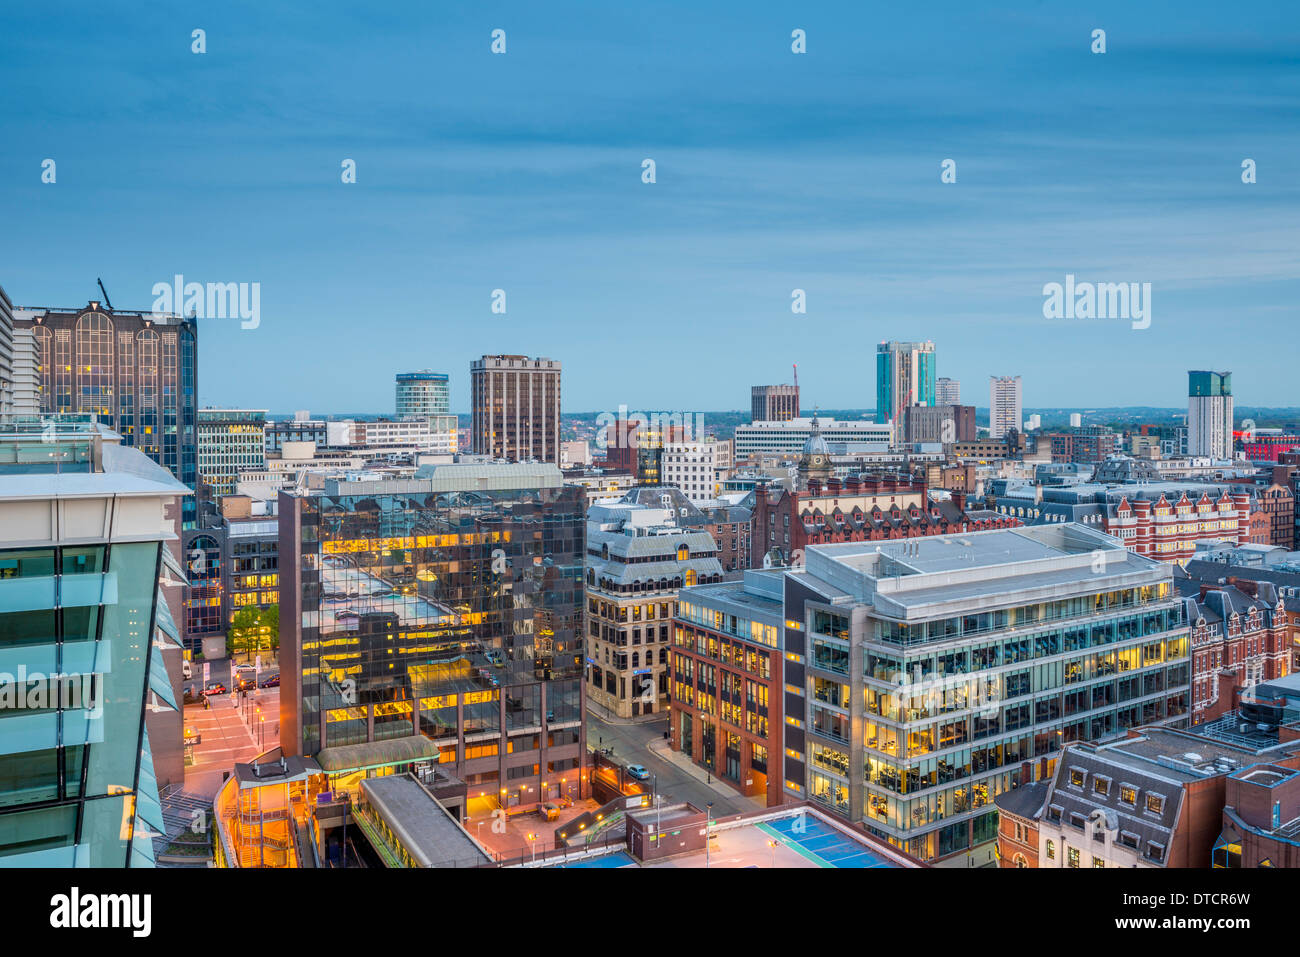 A view over Birmingham city centre from Two Snowhill, West Midlands, England, UK Stock Photo